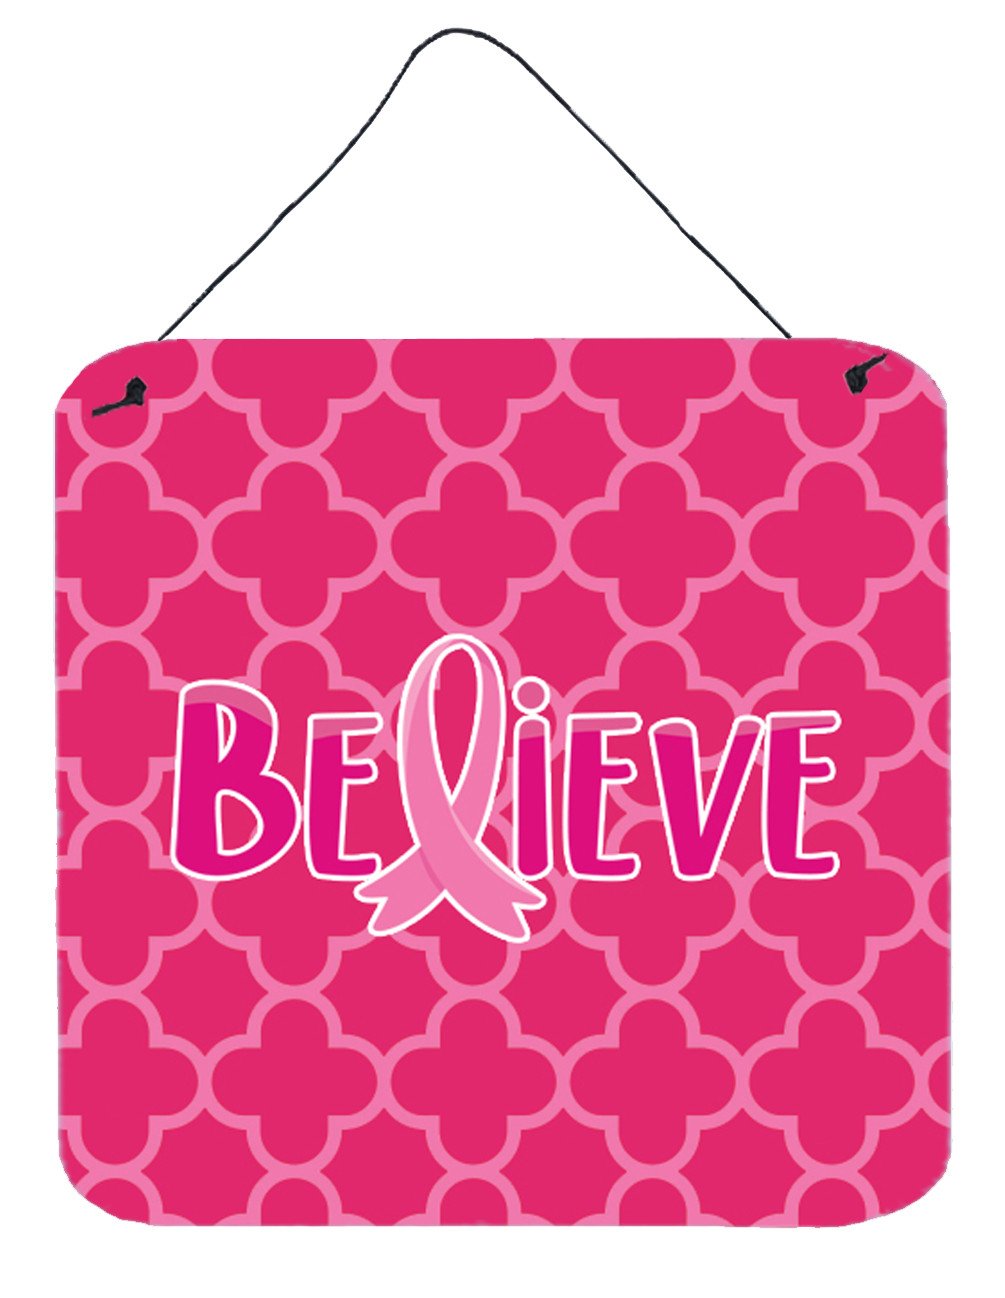 Breast Cancer Awareness Ribbon Believe Wall or Door Hanging Prints BB6980DS66 by Caroline's Treasures